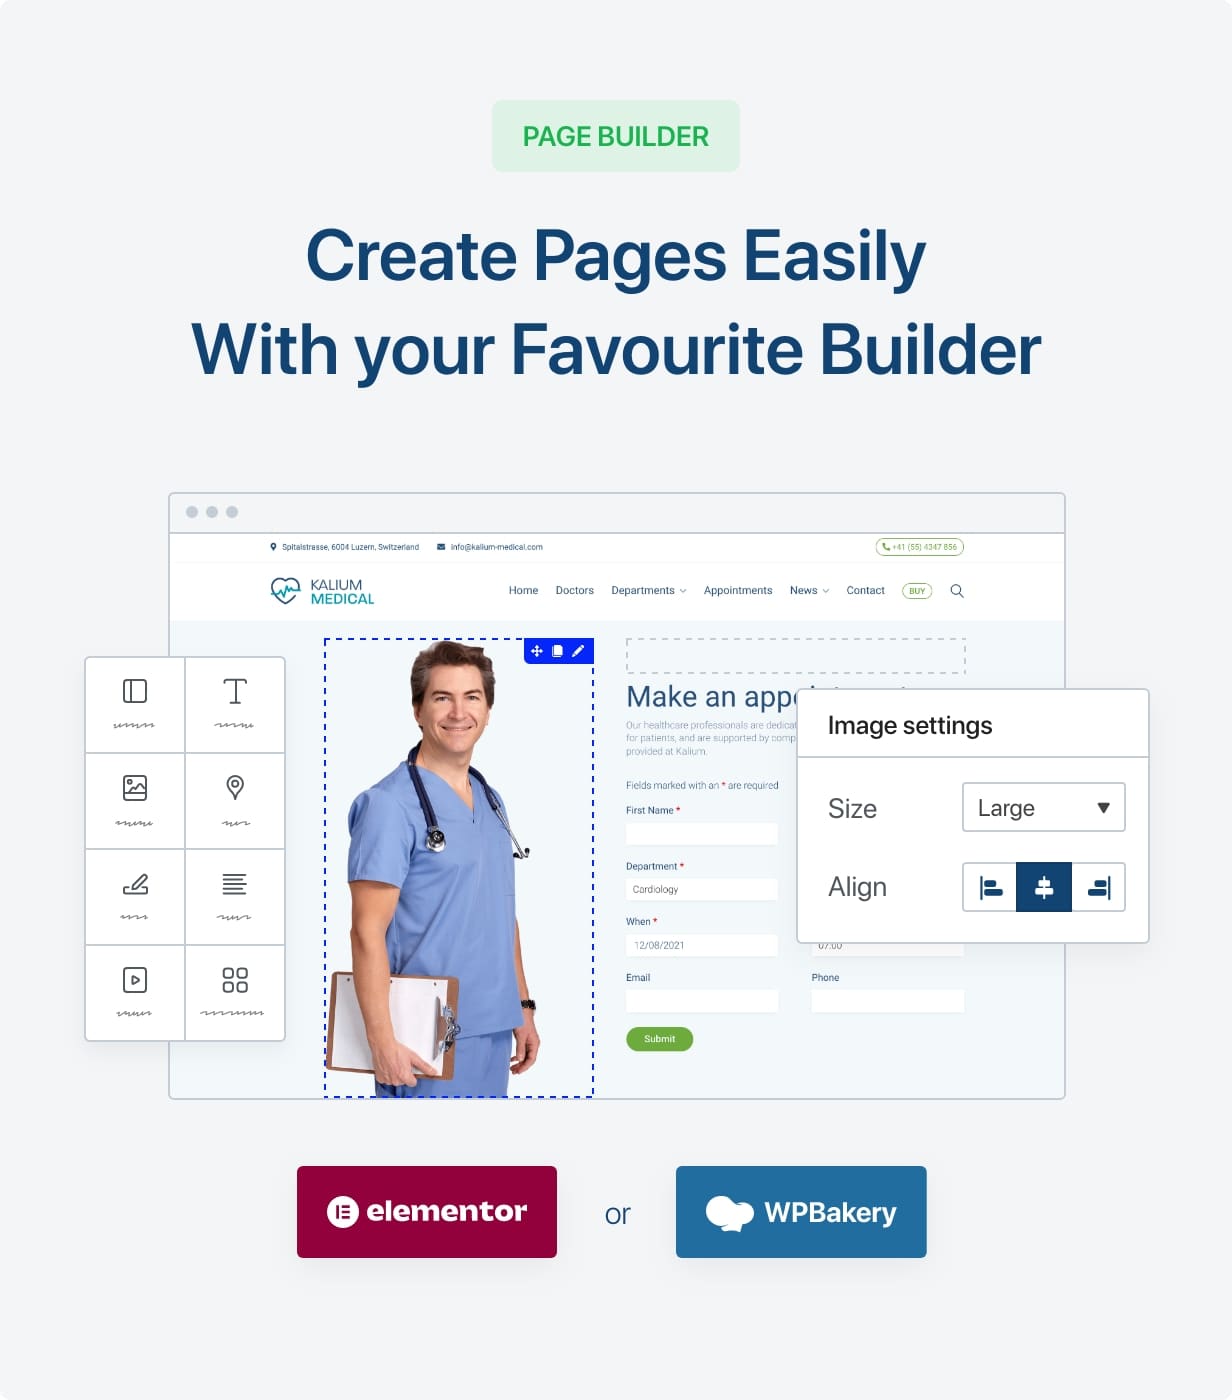 Create Pages Easily with Your Favourite Builder